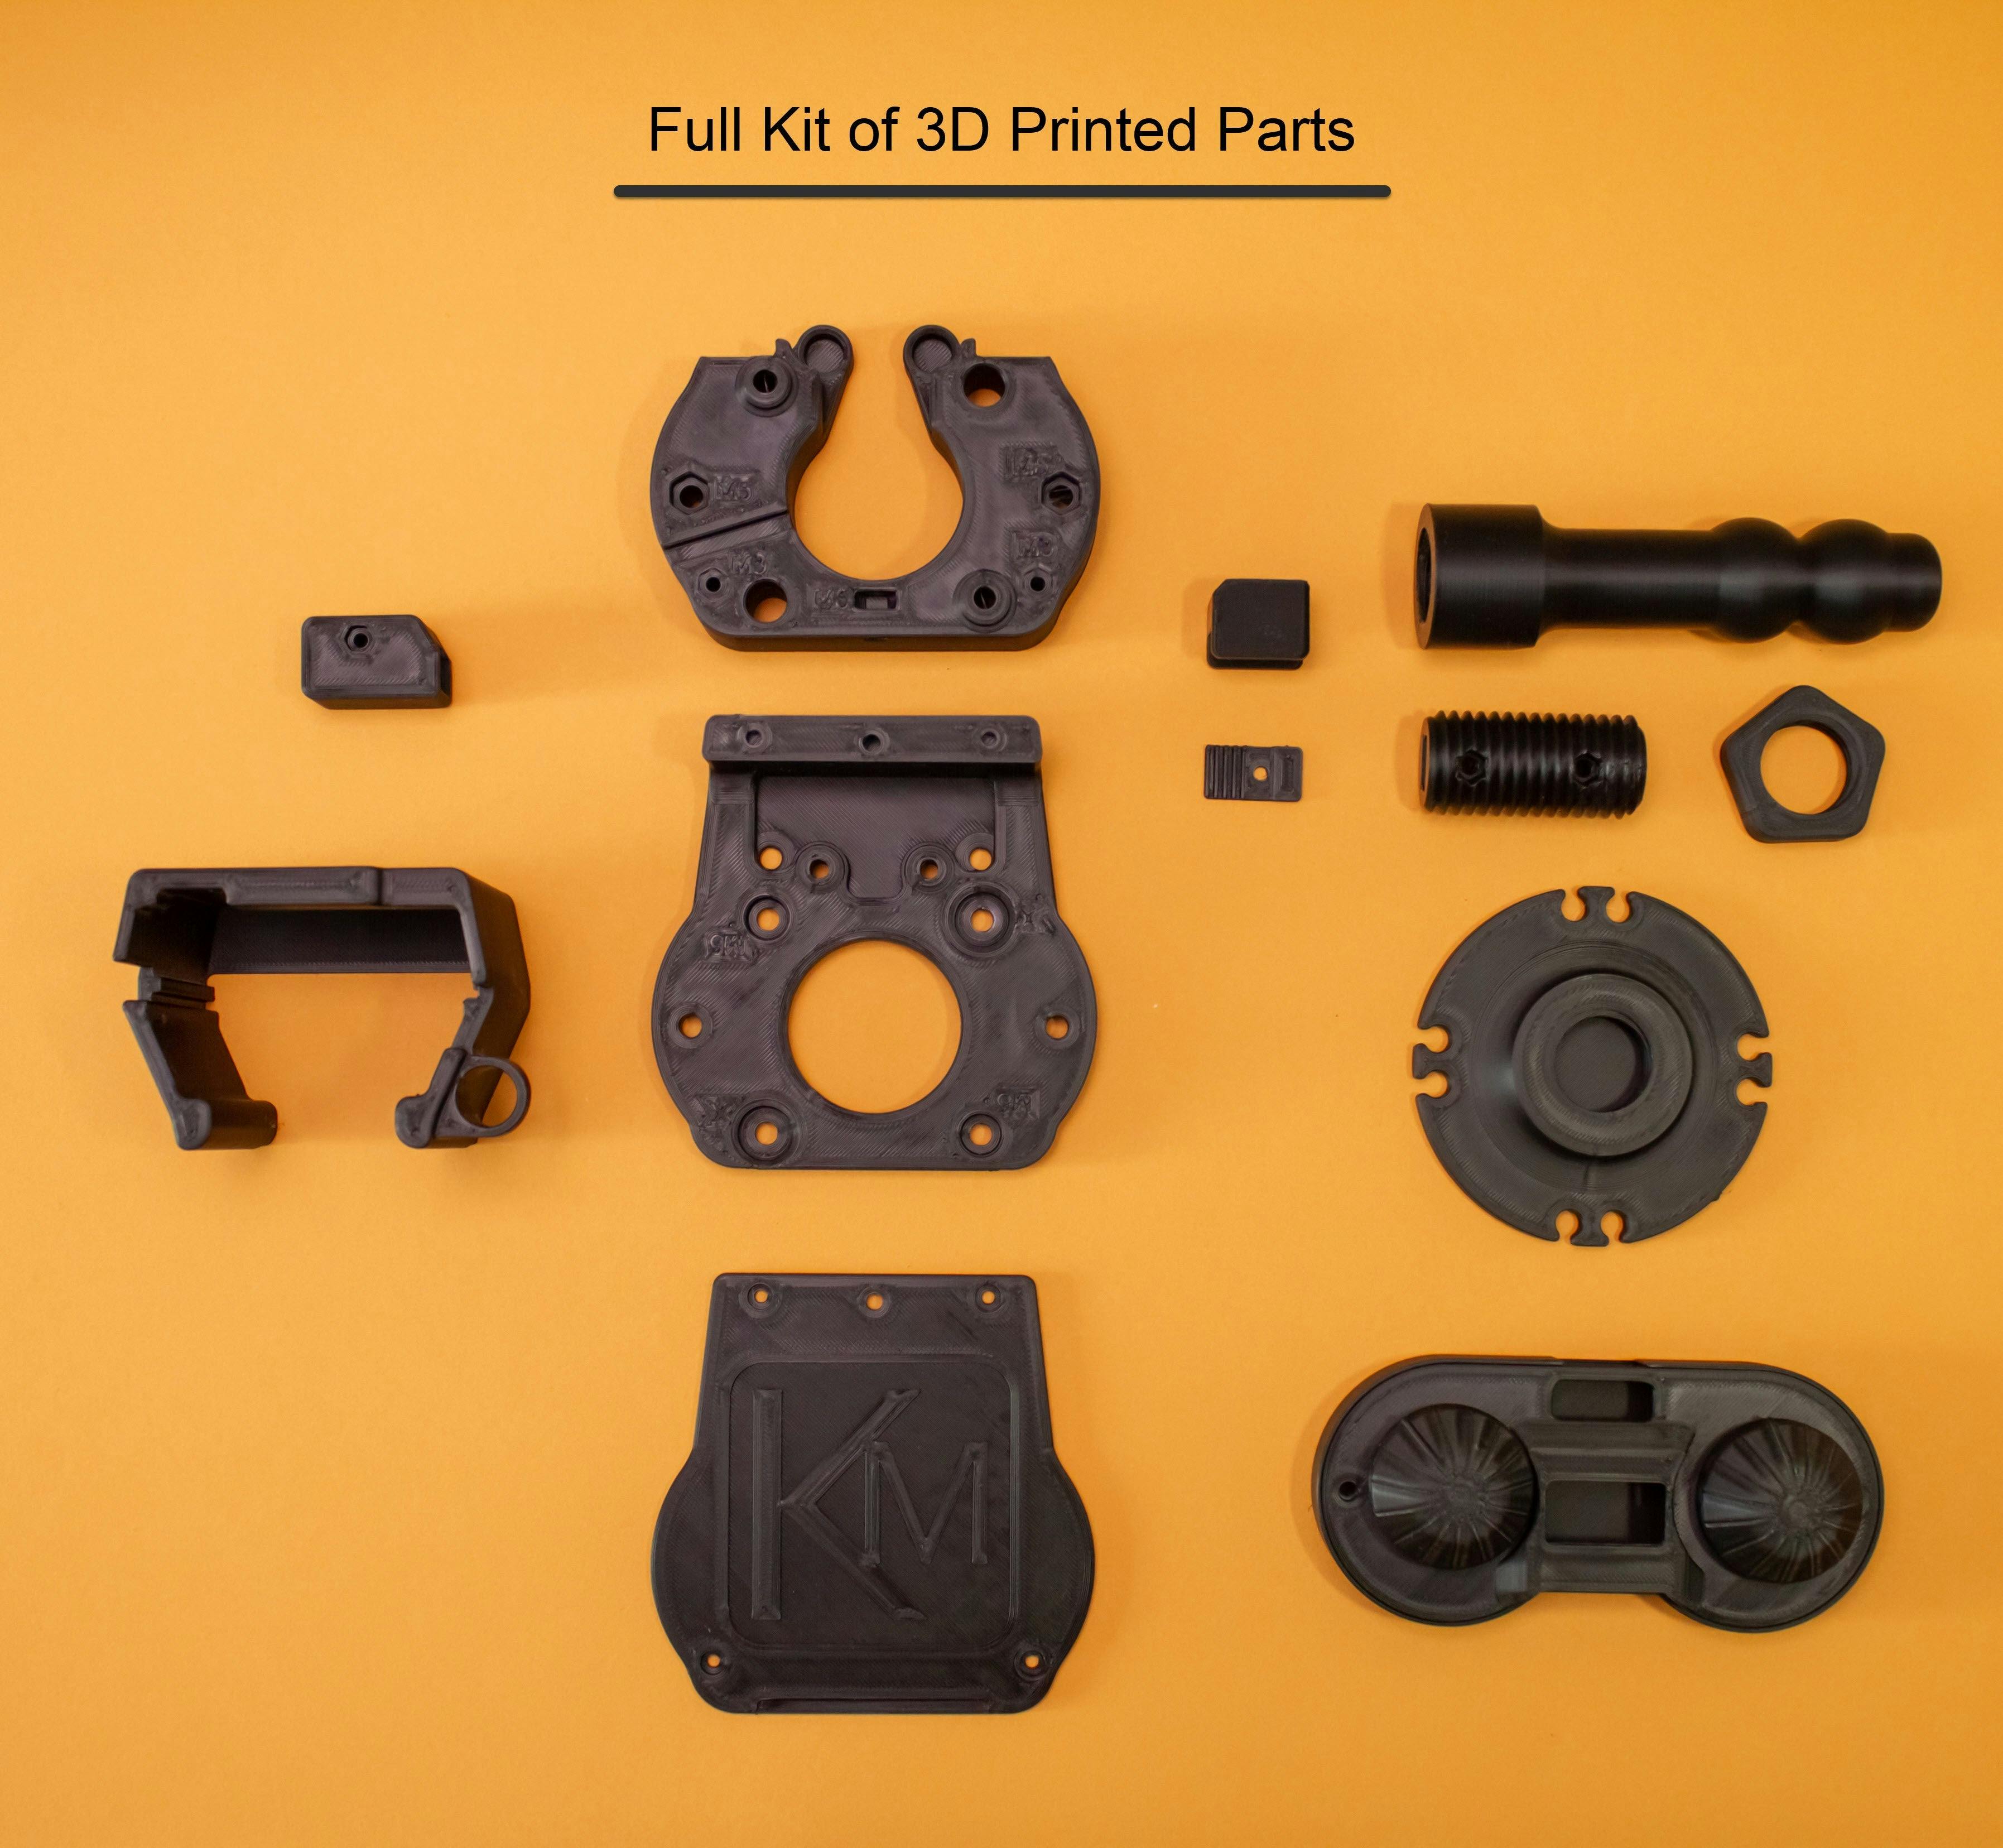 3D Printed Parts Kit for OSSM (Open Source Sex Machine)